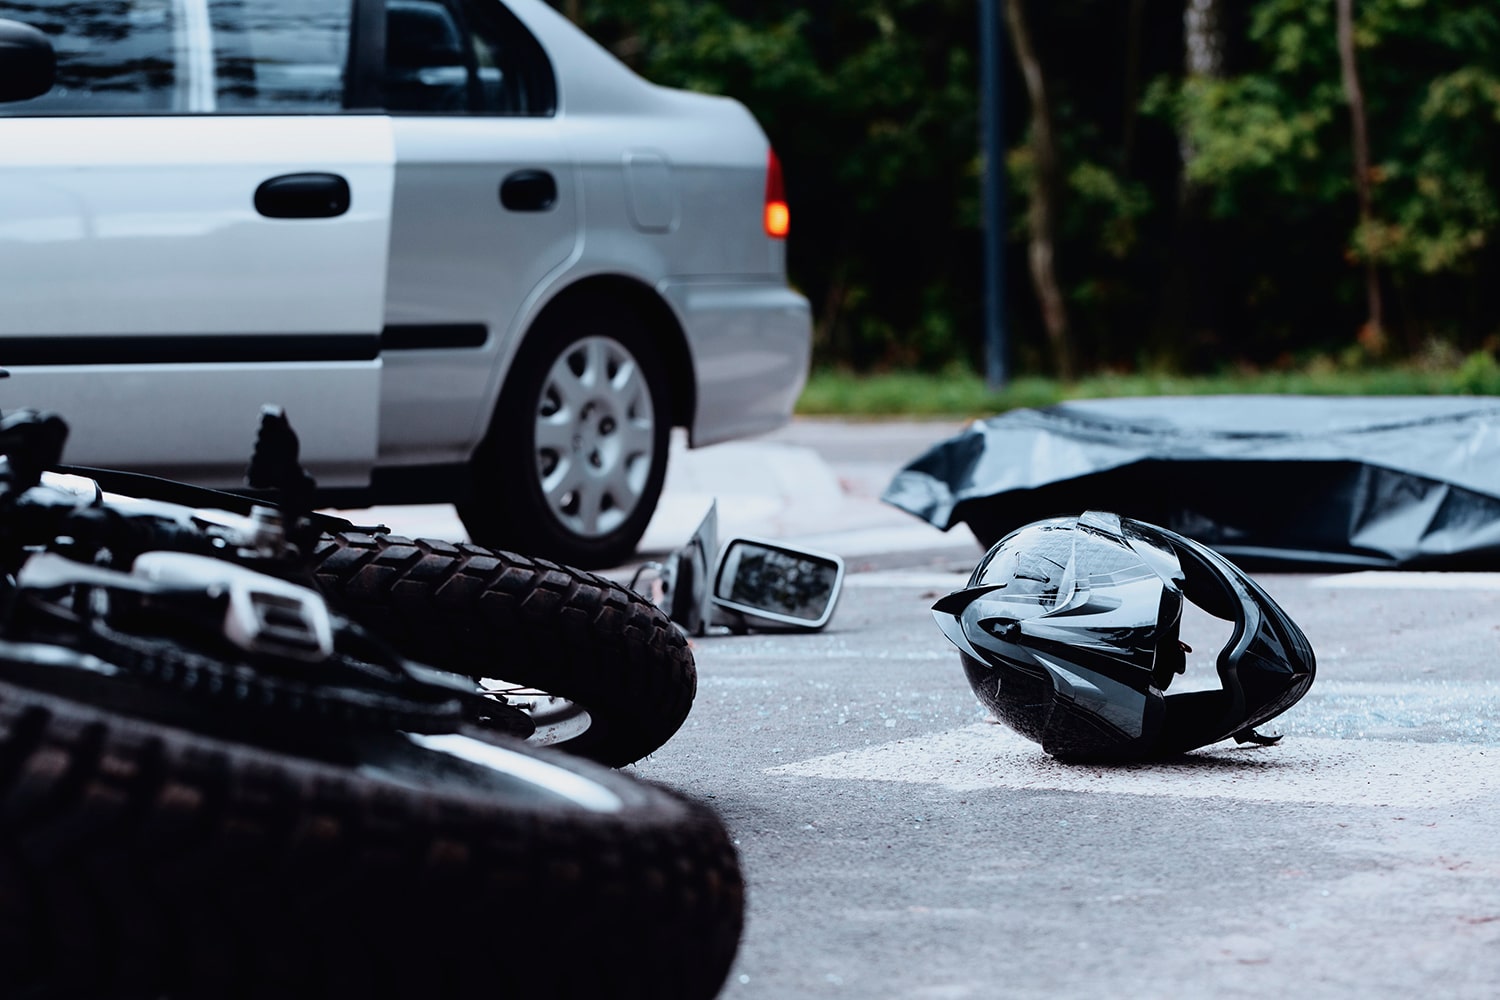 Motorcycle Accident Lawyer Kansas City, MO